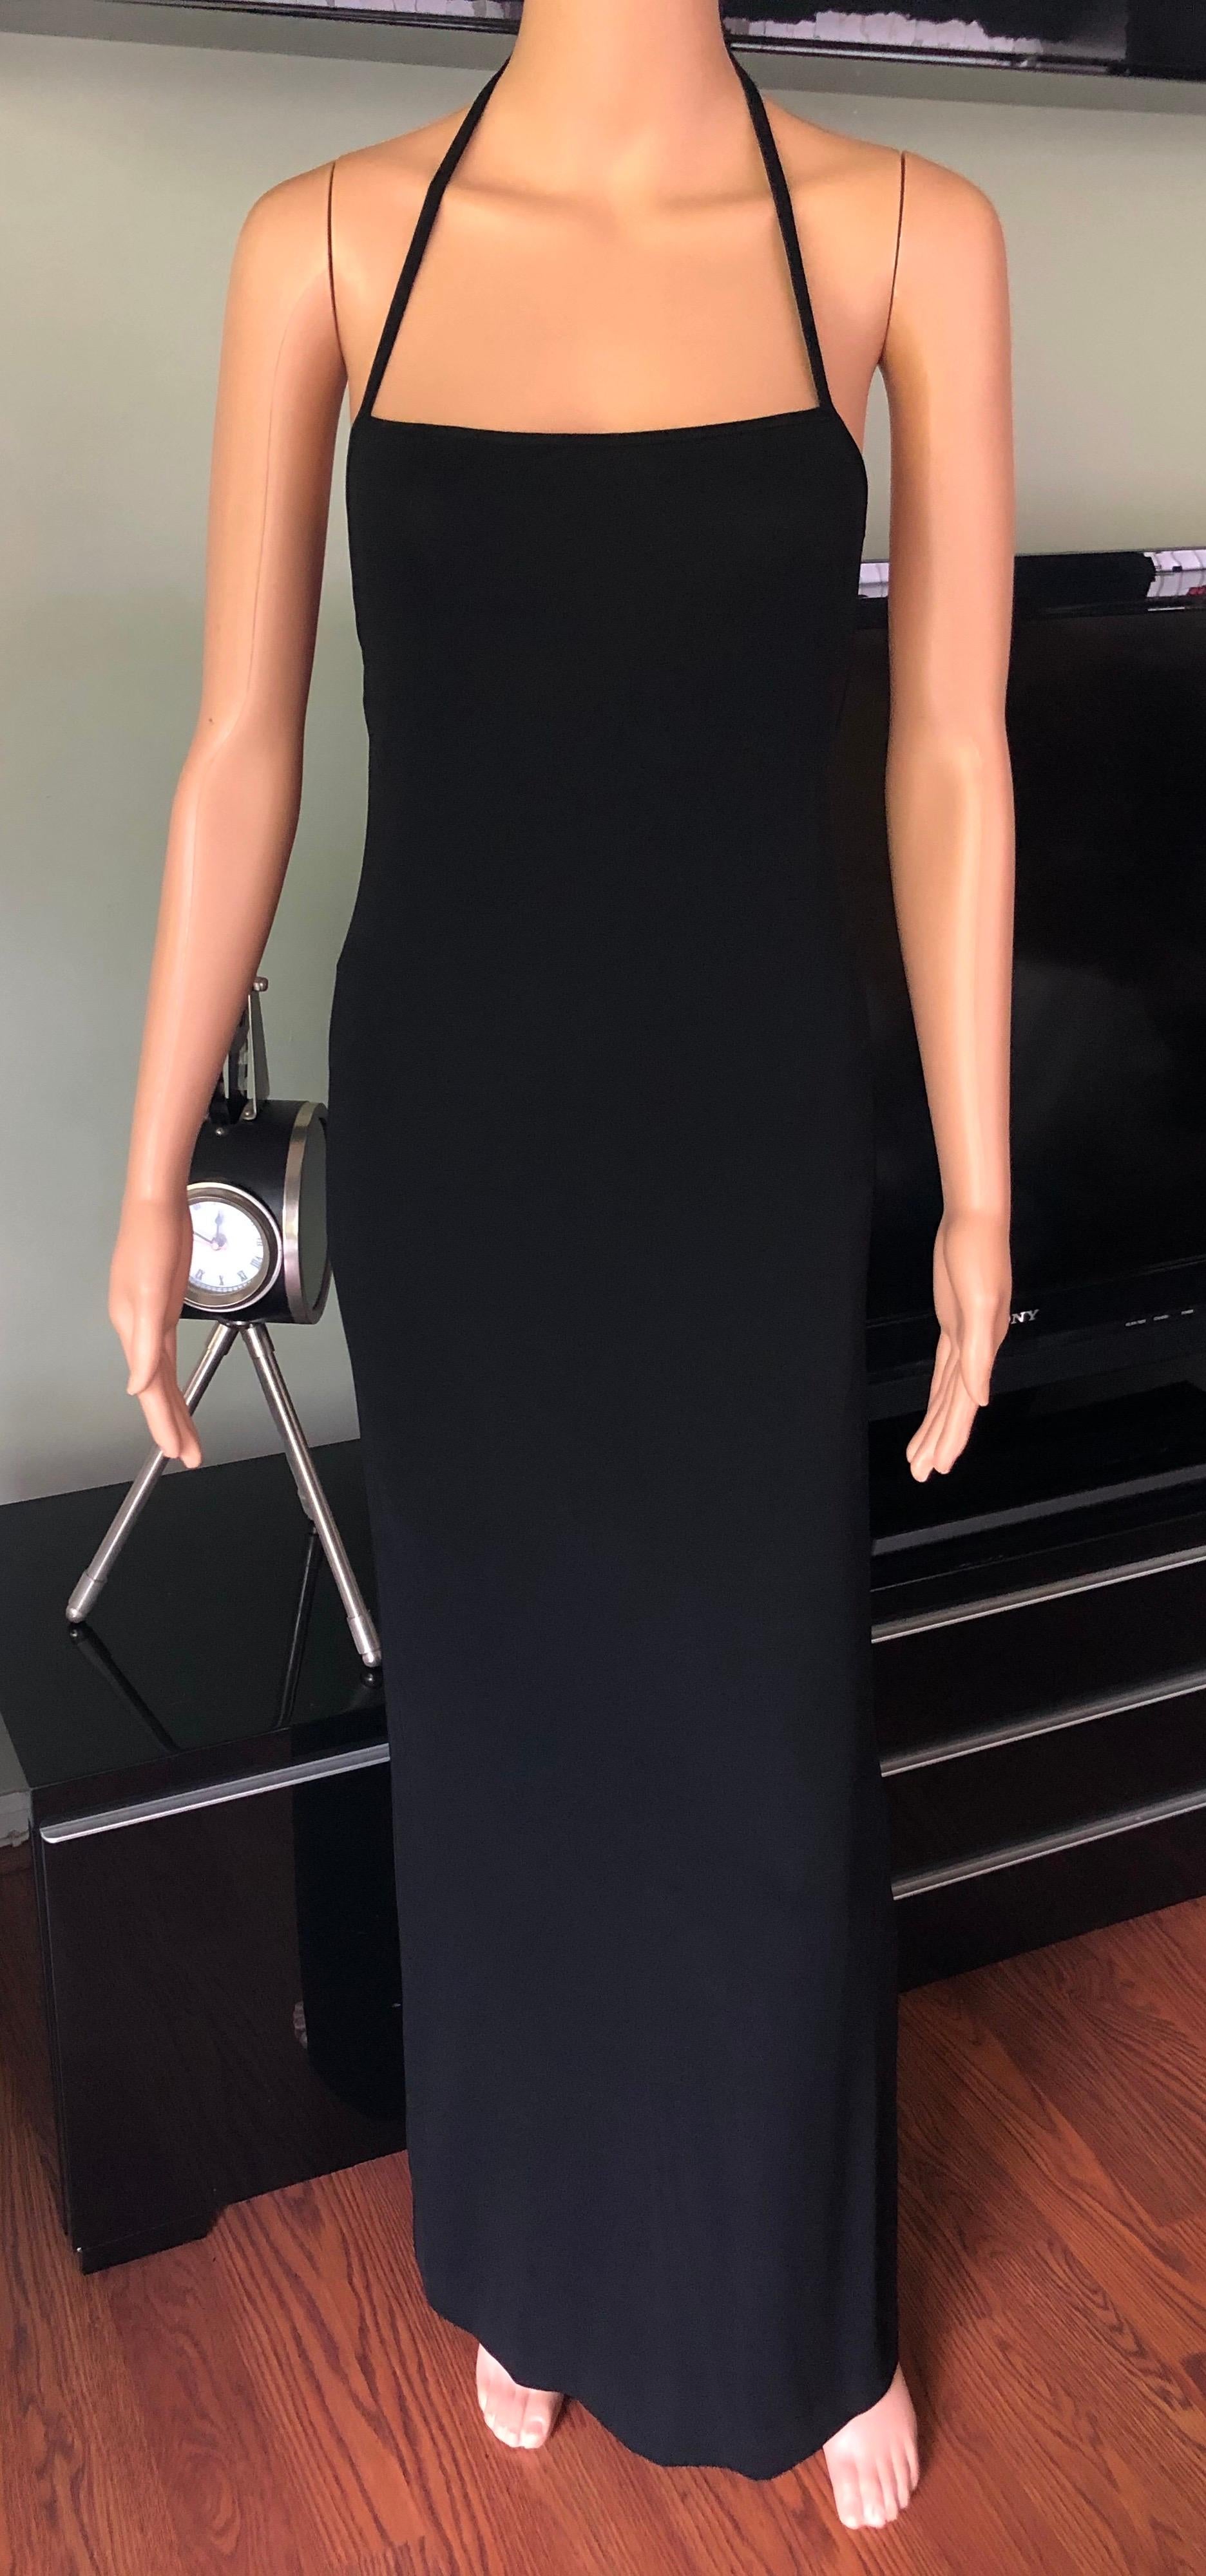 Tom Ford for Gucci S/S 1998 Bodycon Backless Black Evening Dress Gown In Good Condition For Sale In Naples, FL